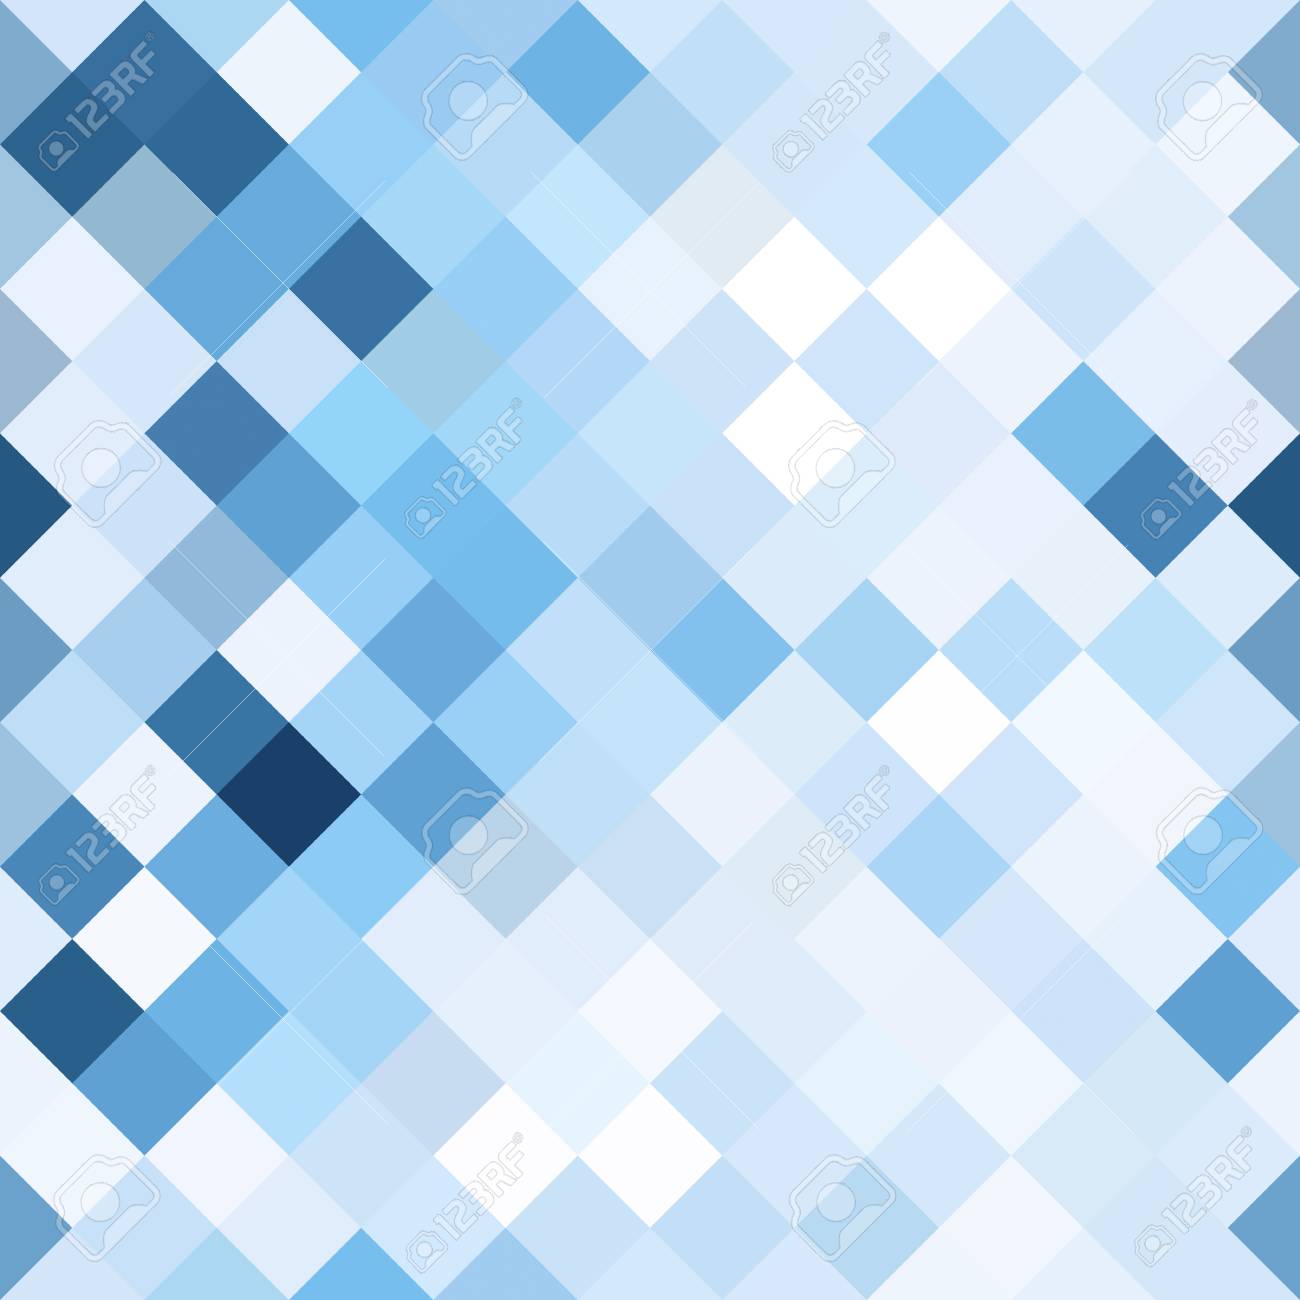 Repeating Pattern With Seamless Pixel Art Background Abstract